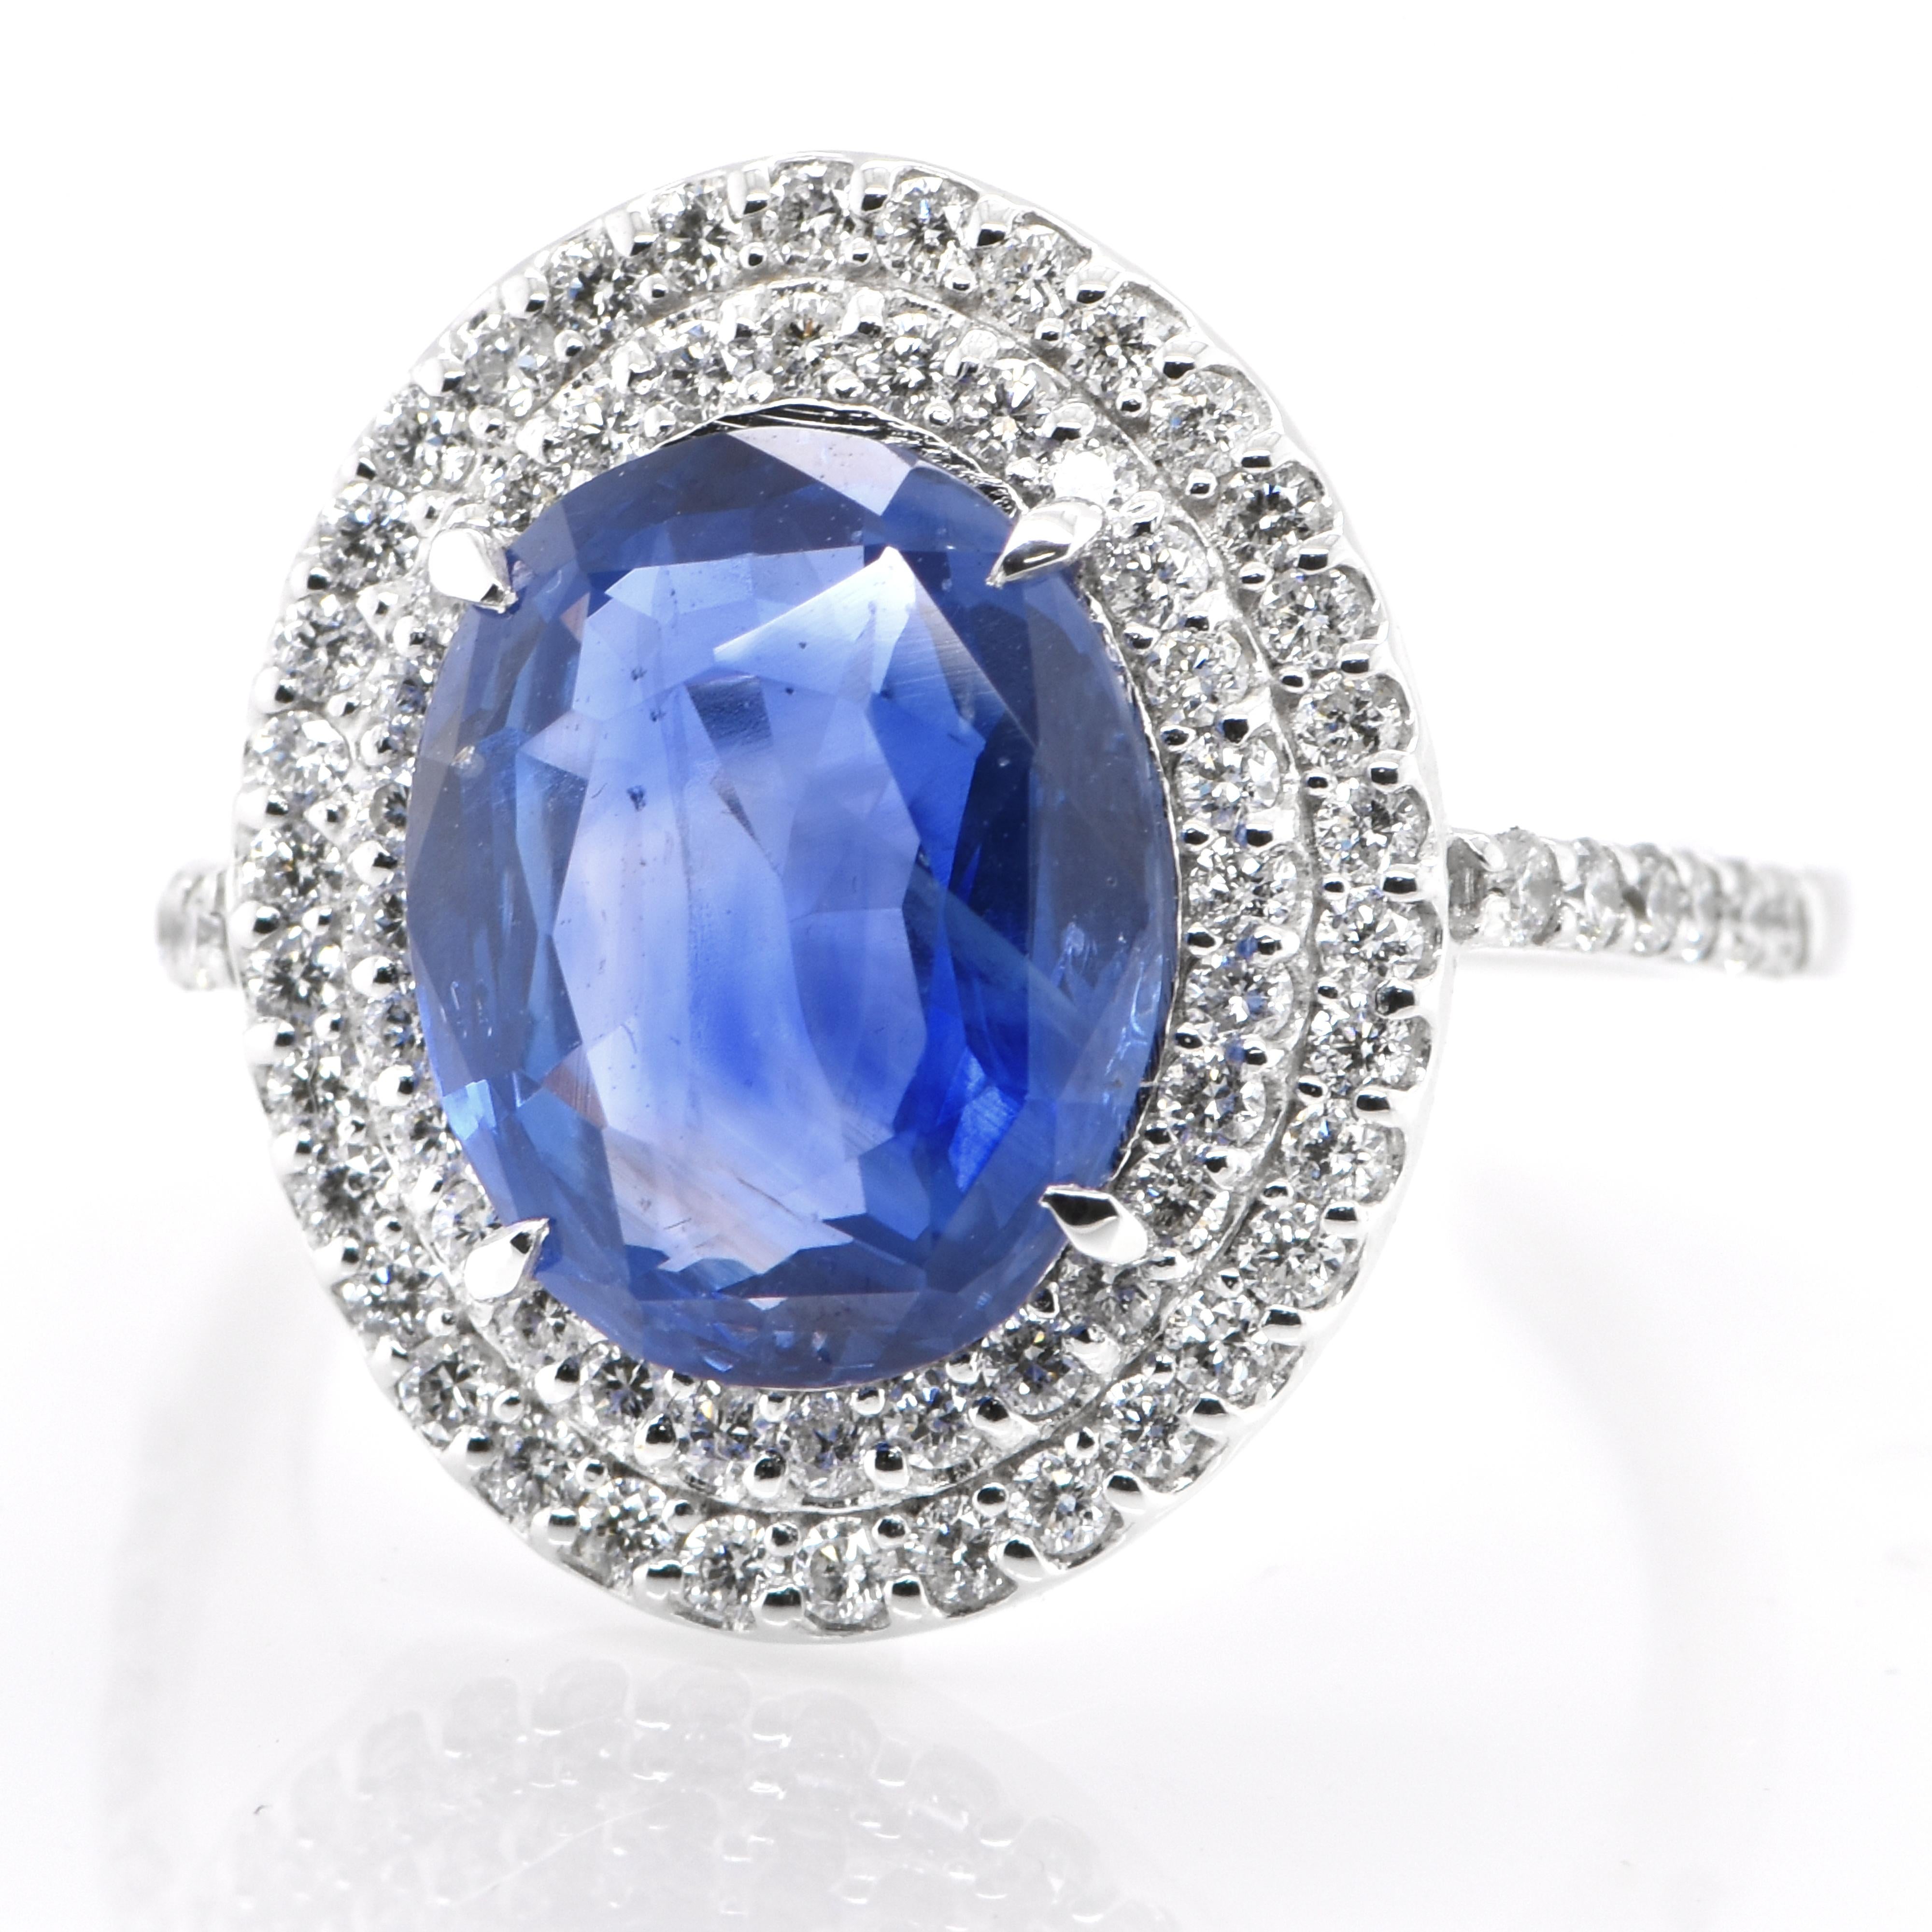 A beautiful ring featuring a GIA Certified 4.73 Carat, Natural Unheated, Ceylon Blue Sapphire and 0.62 Carats Diamond Accents set in Platinum. Sapphires have extraordinary durability - they excel in hardness as well as toughness and durability